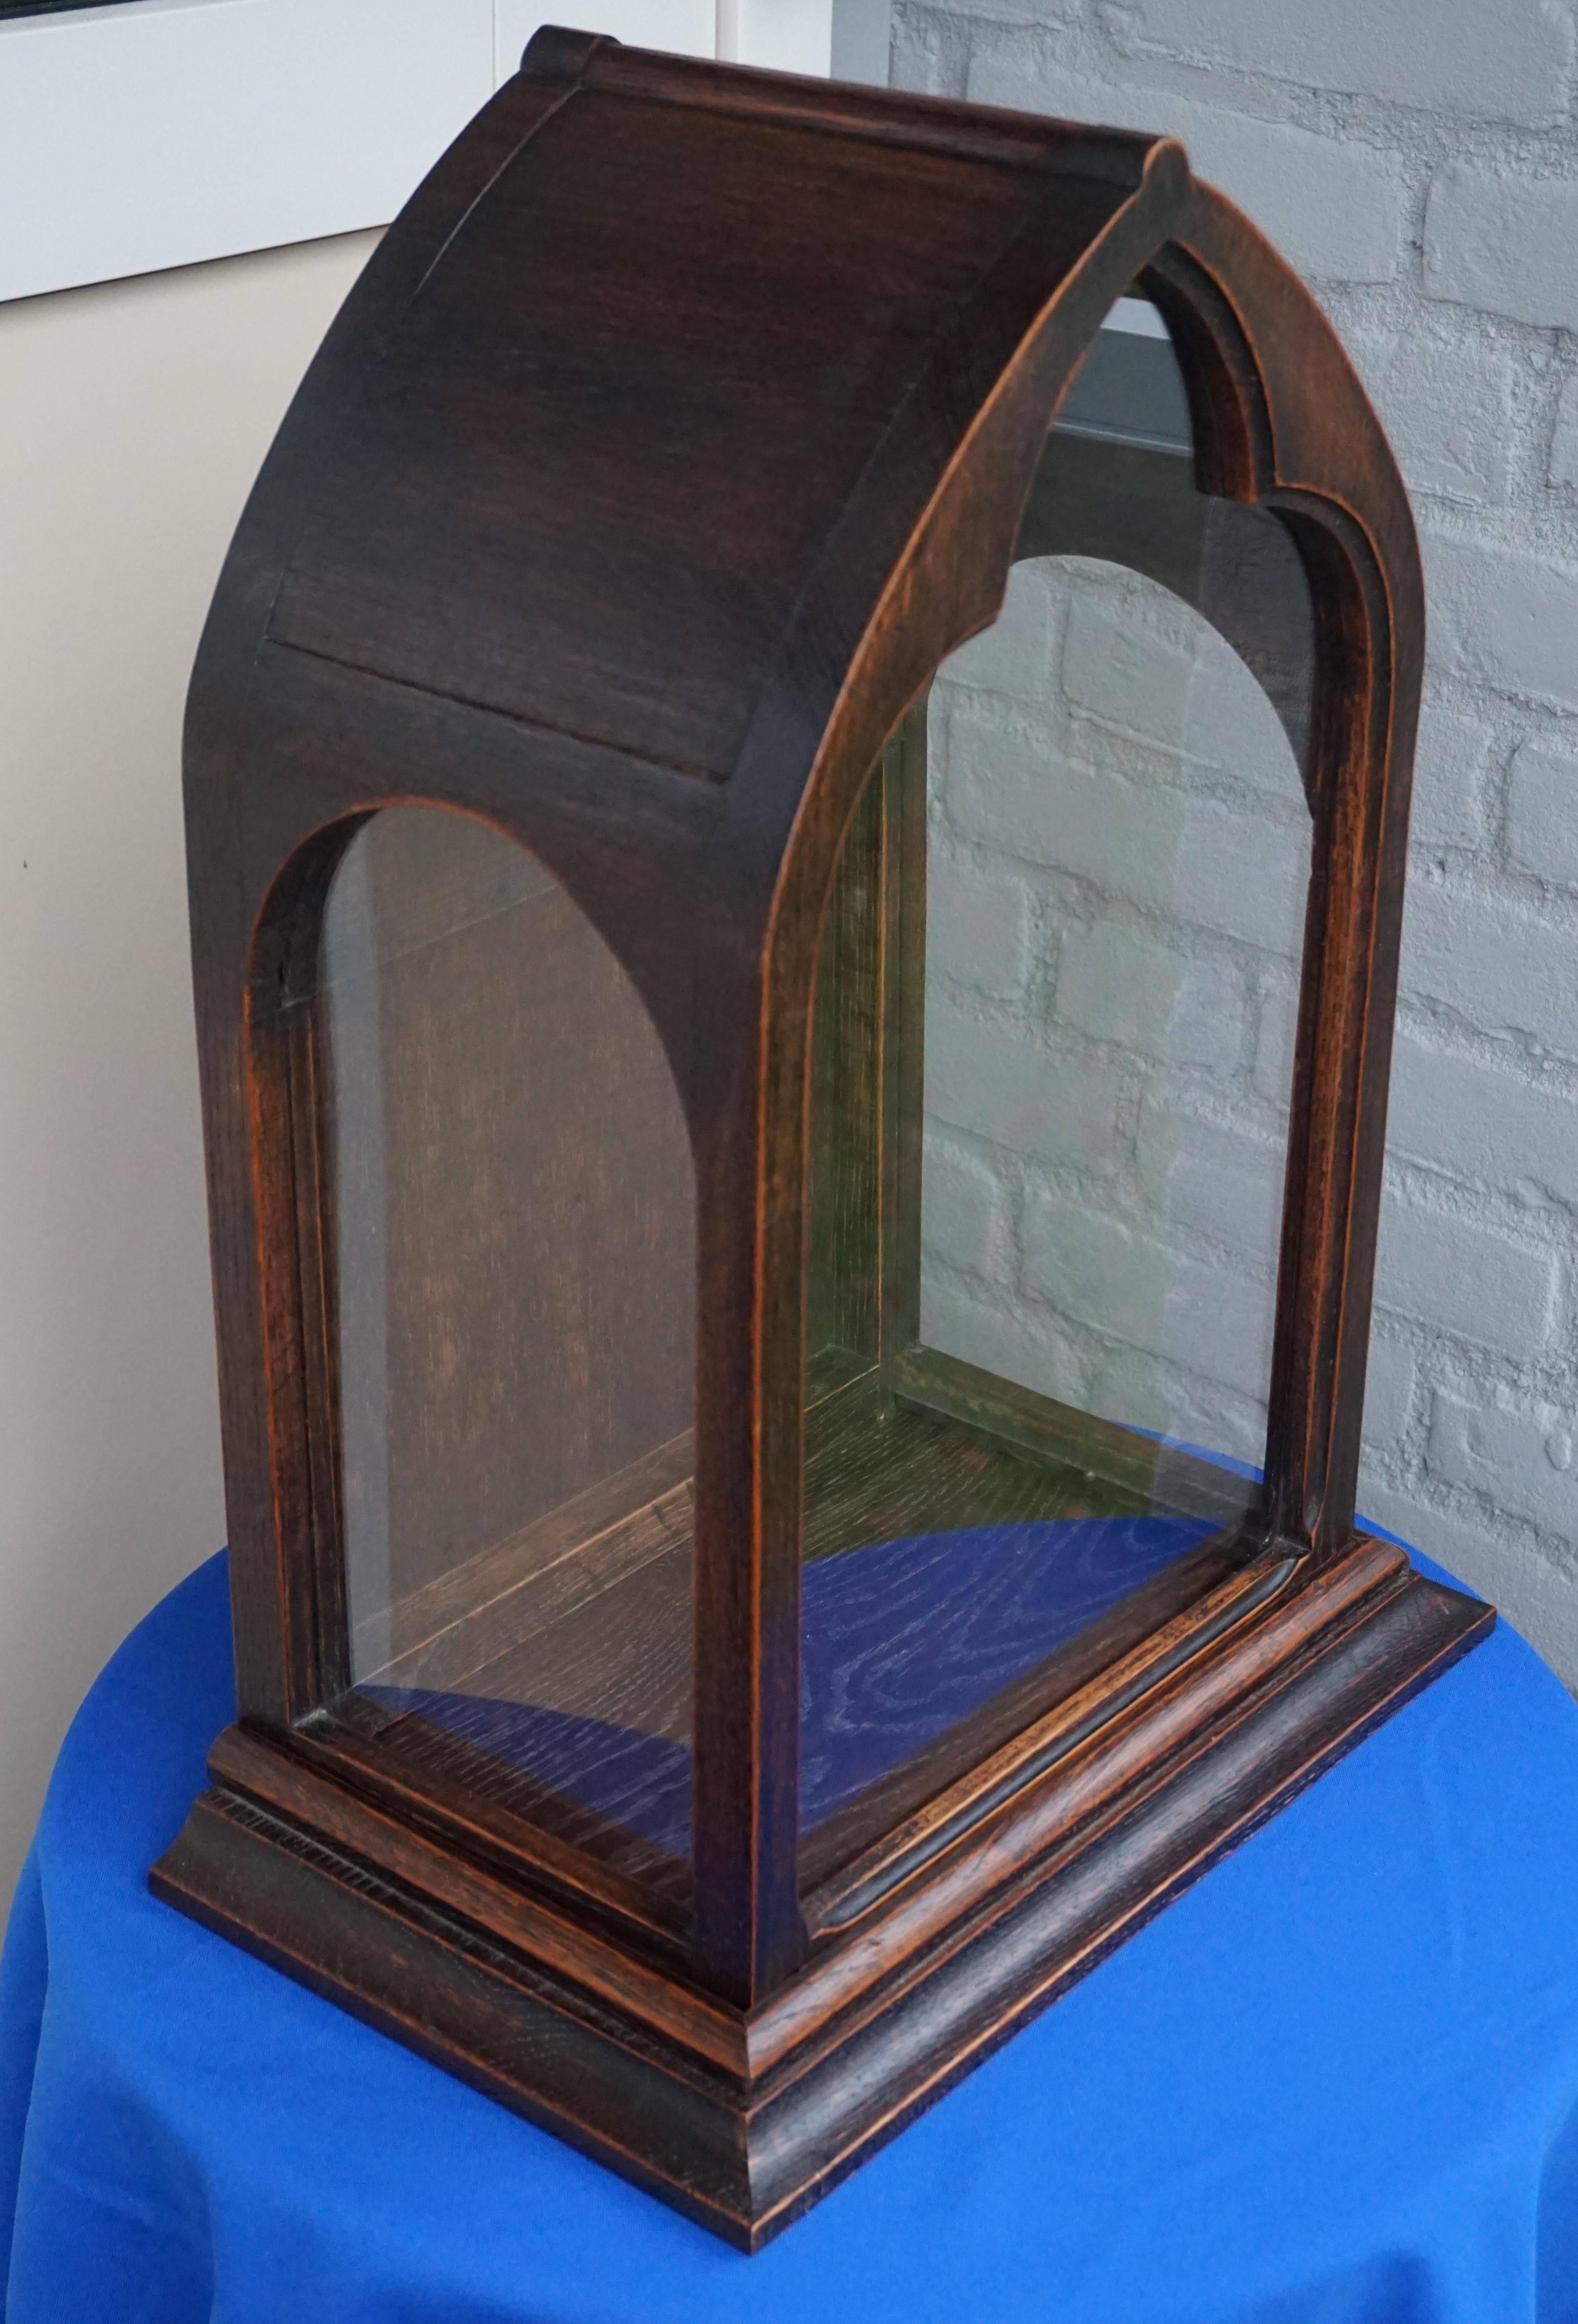 Hand-Crafted Antique Gothic Revival Glass and Oak Chapel / Display Cabinet for a Saint Statue